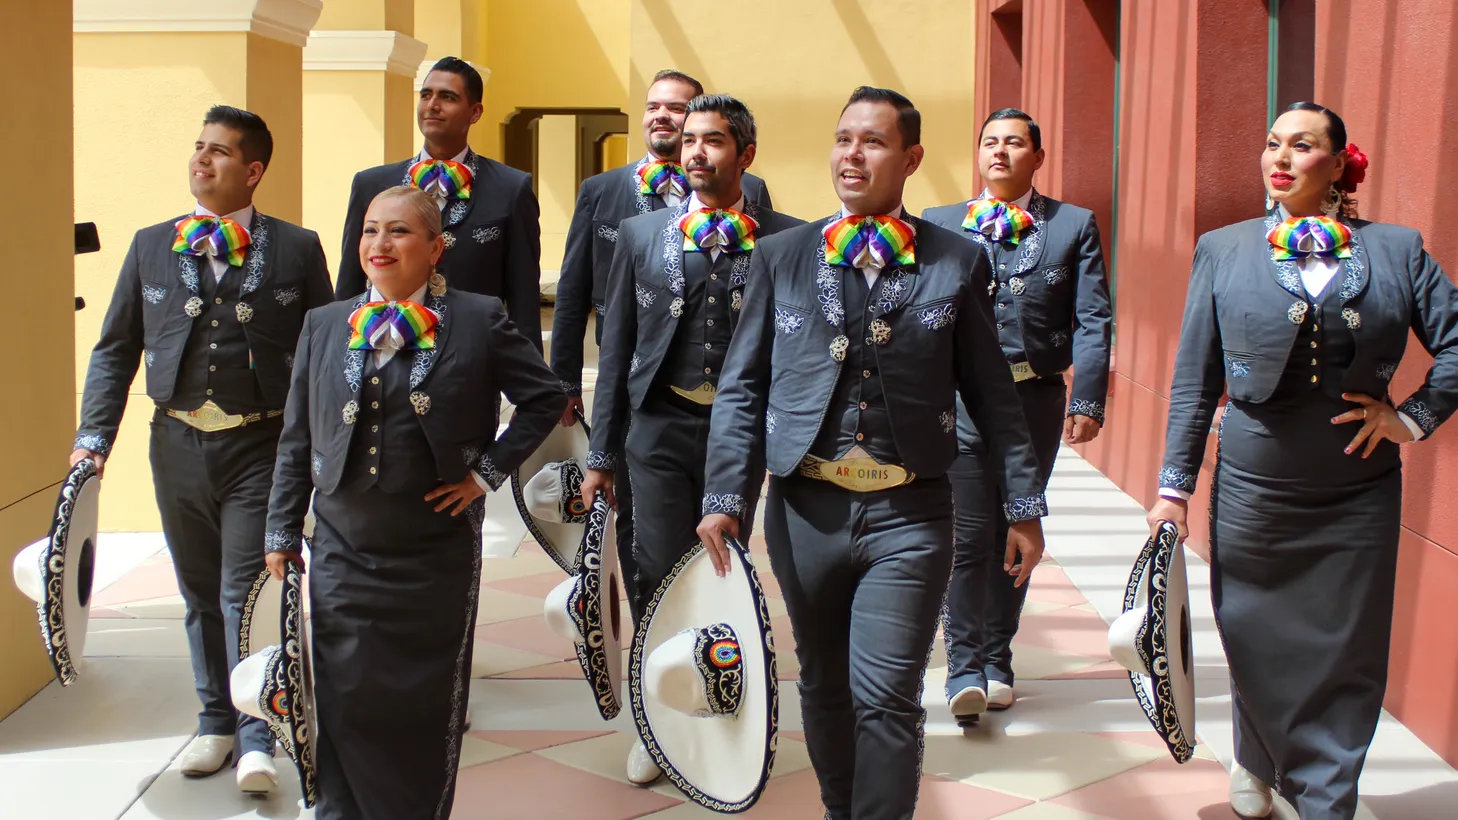 Carlos Samaniego, (front row, center), is the founder and director of Mariachi Arcoiris. “It's an incredible feeling to be able to show this city and the world that we exist, and that we're not afraid to express who we are, and still perform traditional music at the same time. It's beautiful,” he says.